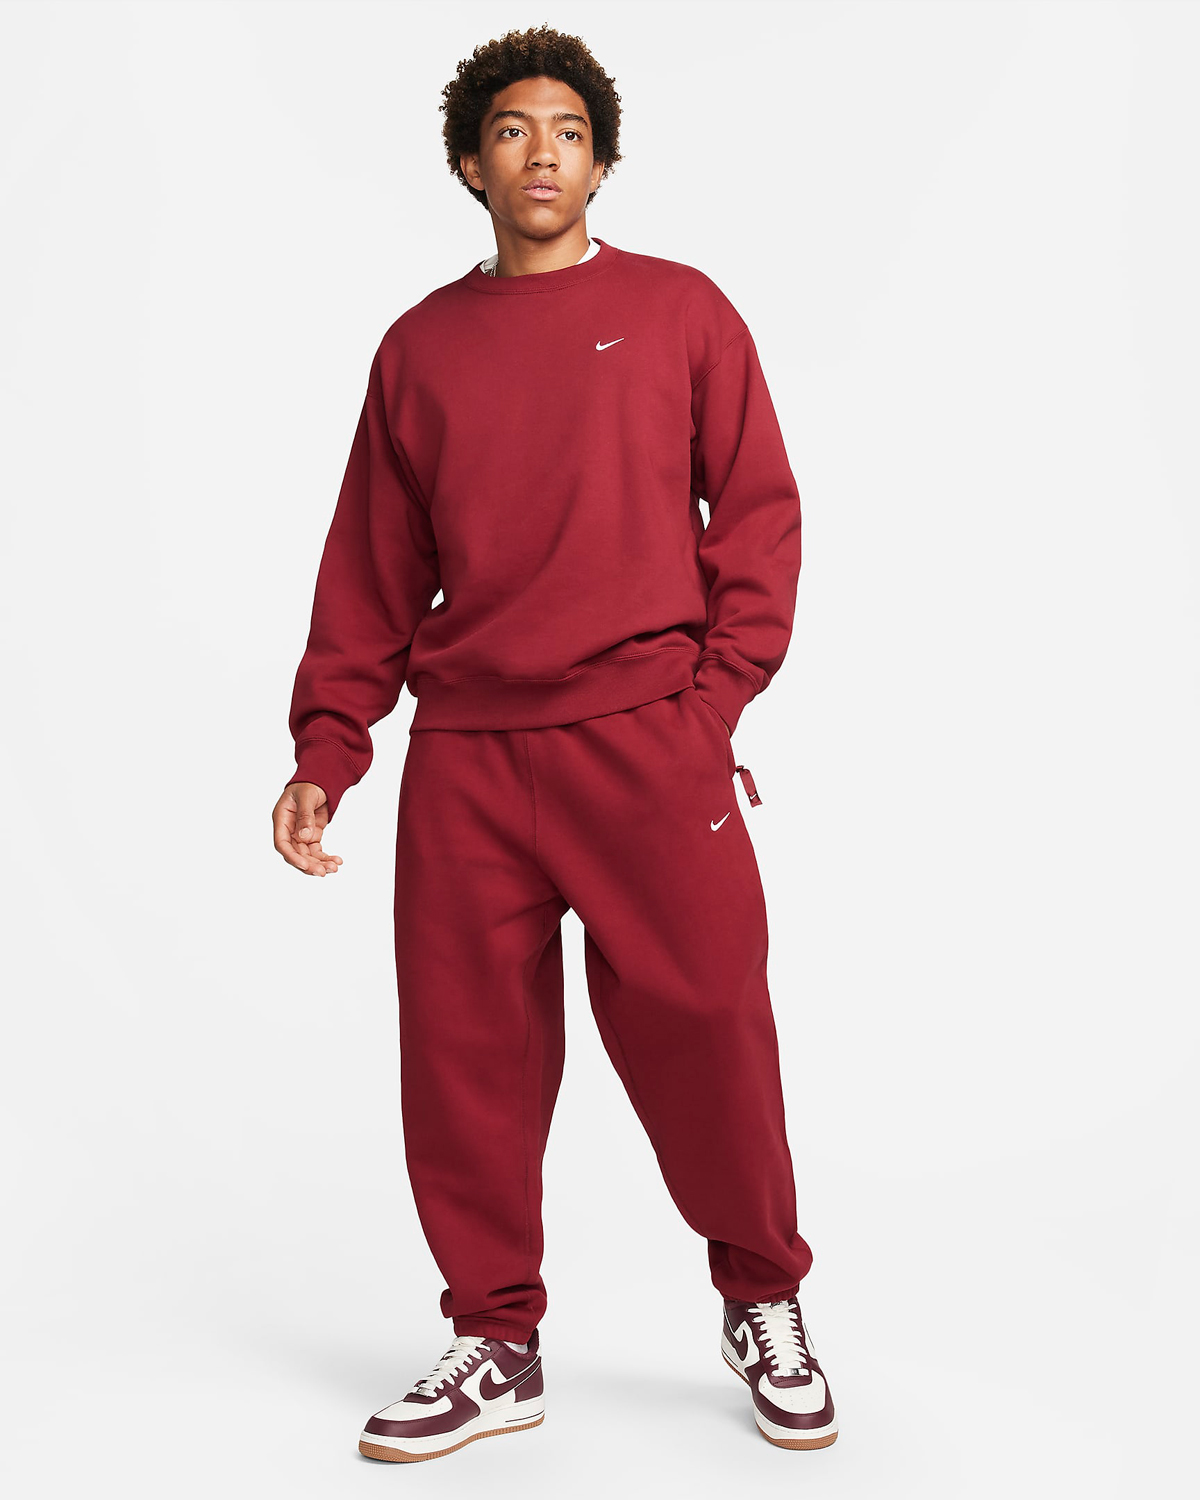 Nike-Solo-Swoosh-Fleece-Pants-Team-Red-Outfit